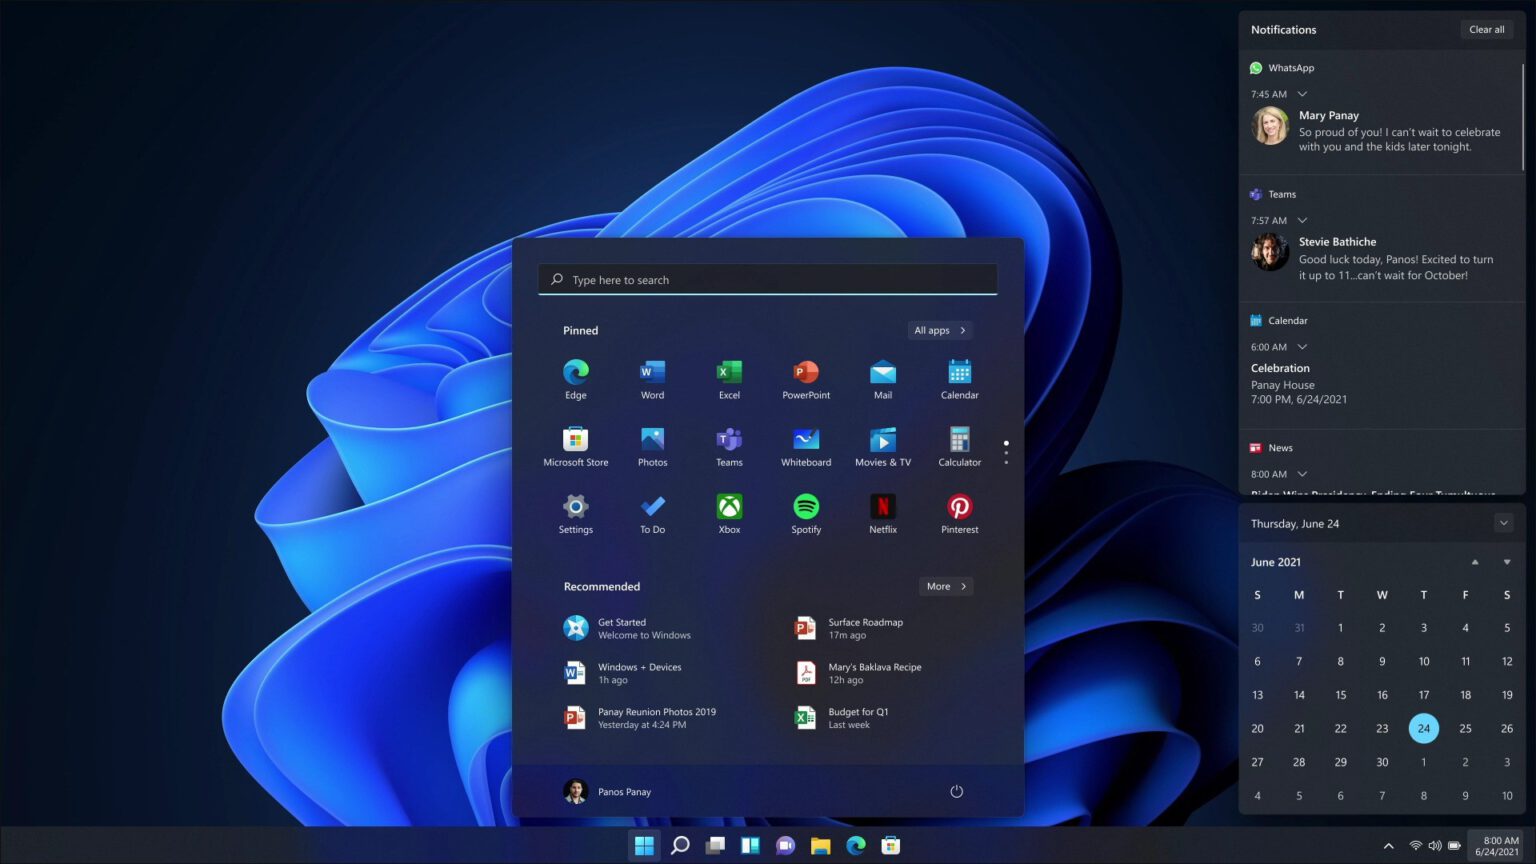 This Is The New Windows 11 Notification Center 533356 2 This Is The